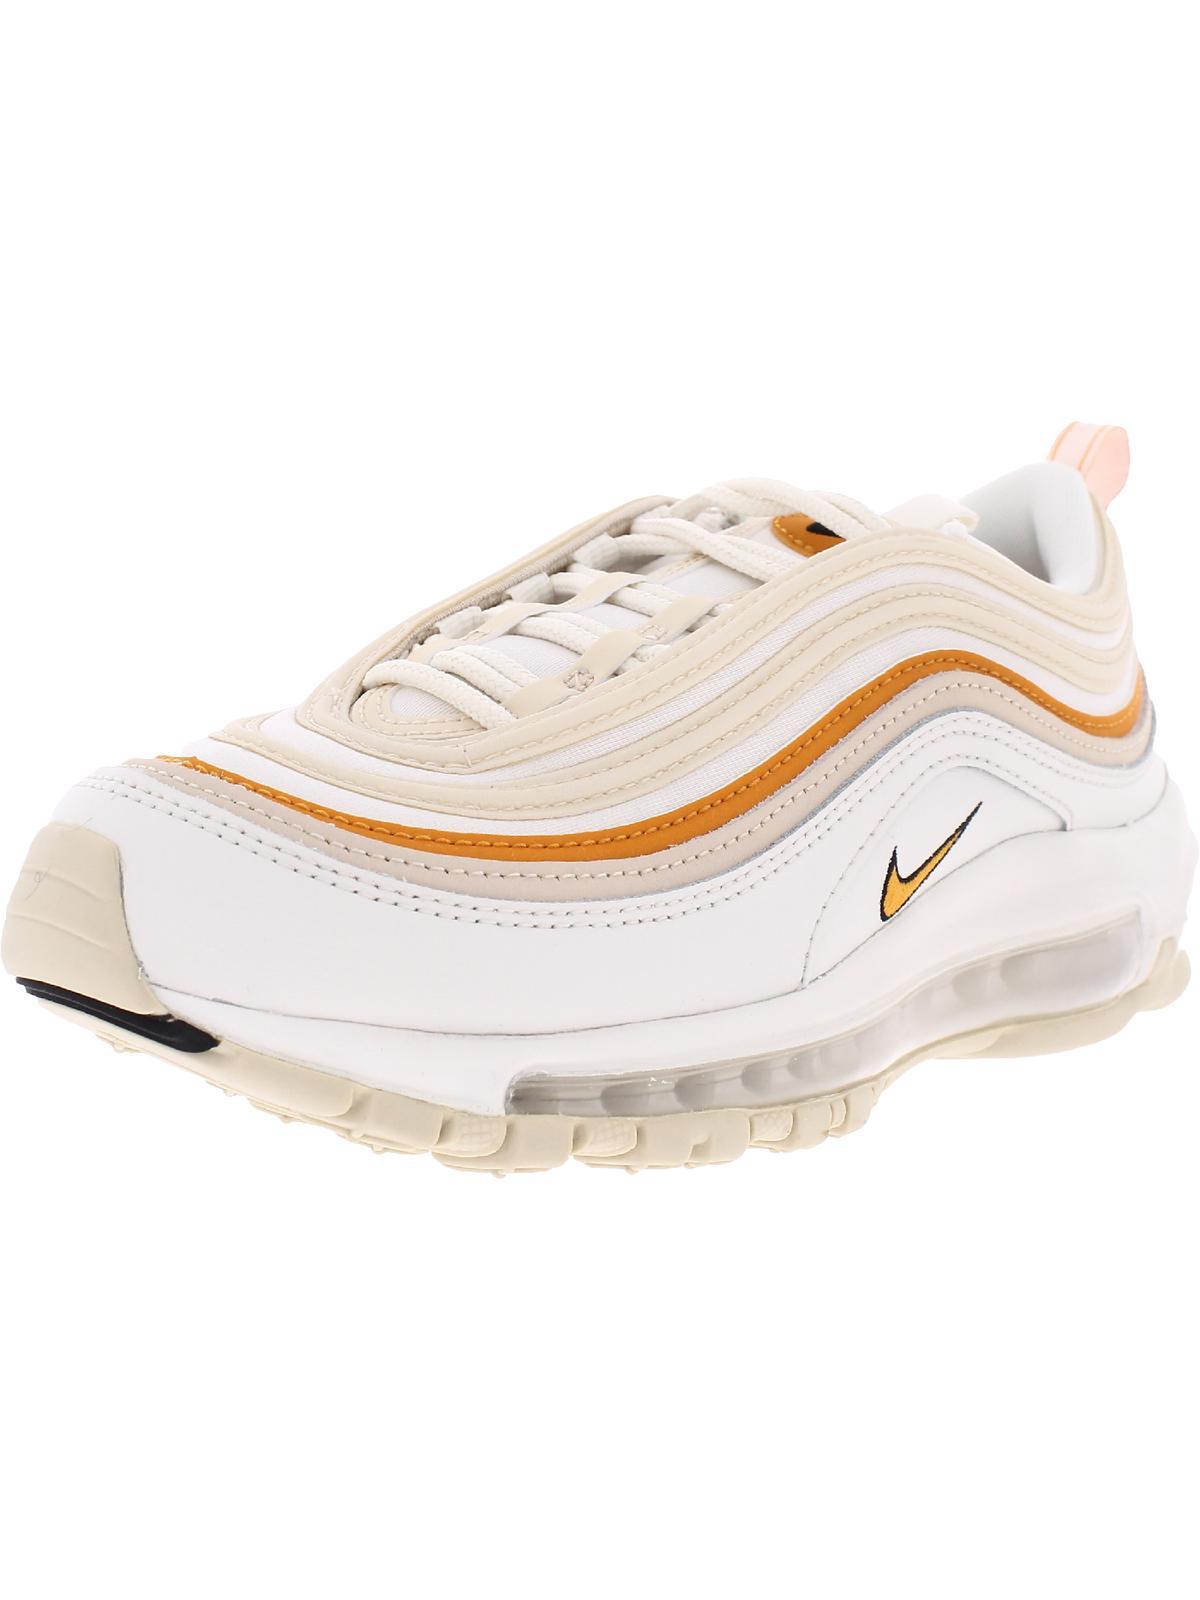 Nike Air Max 97 Performance Lifestyle Casual And Fashion Sneakers in  Natural | Lyst